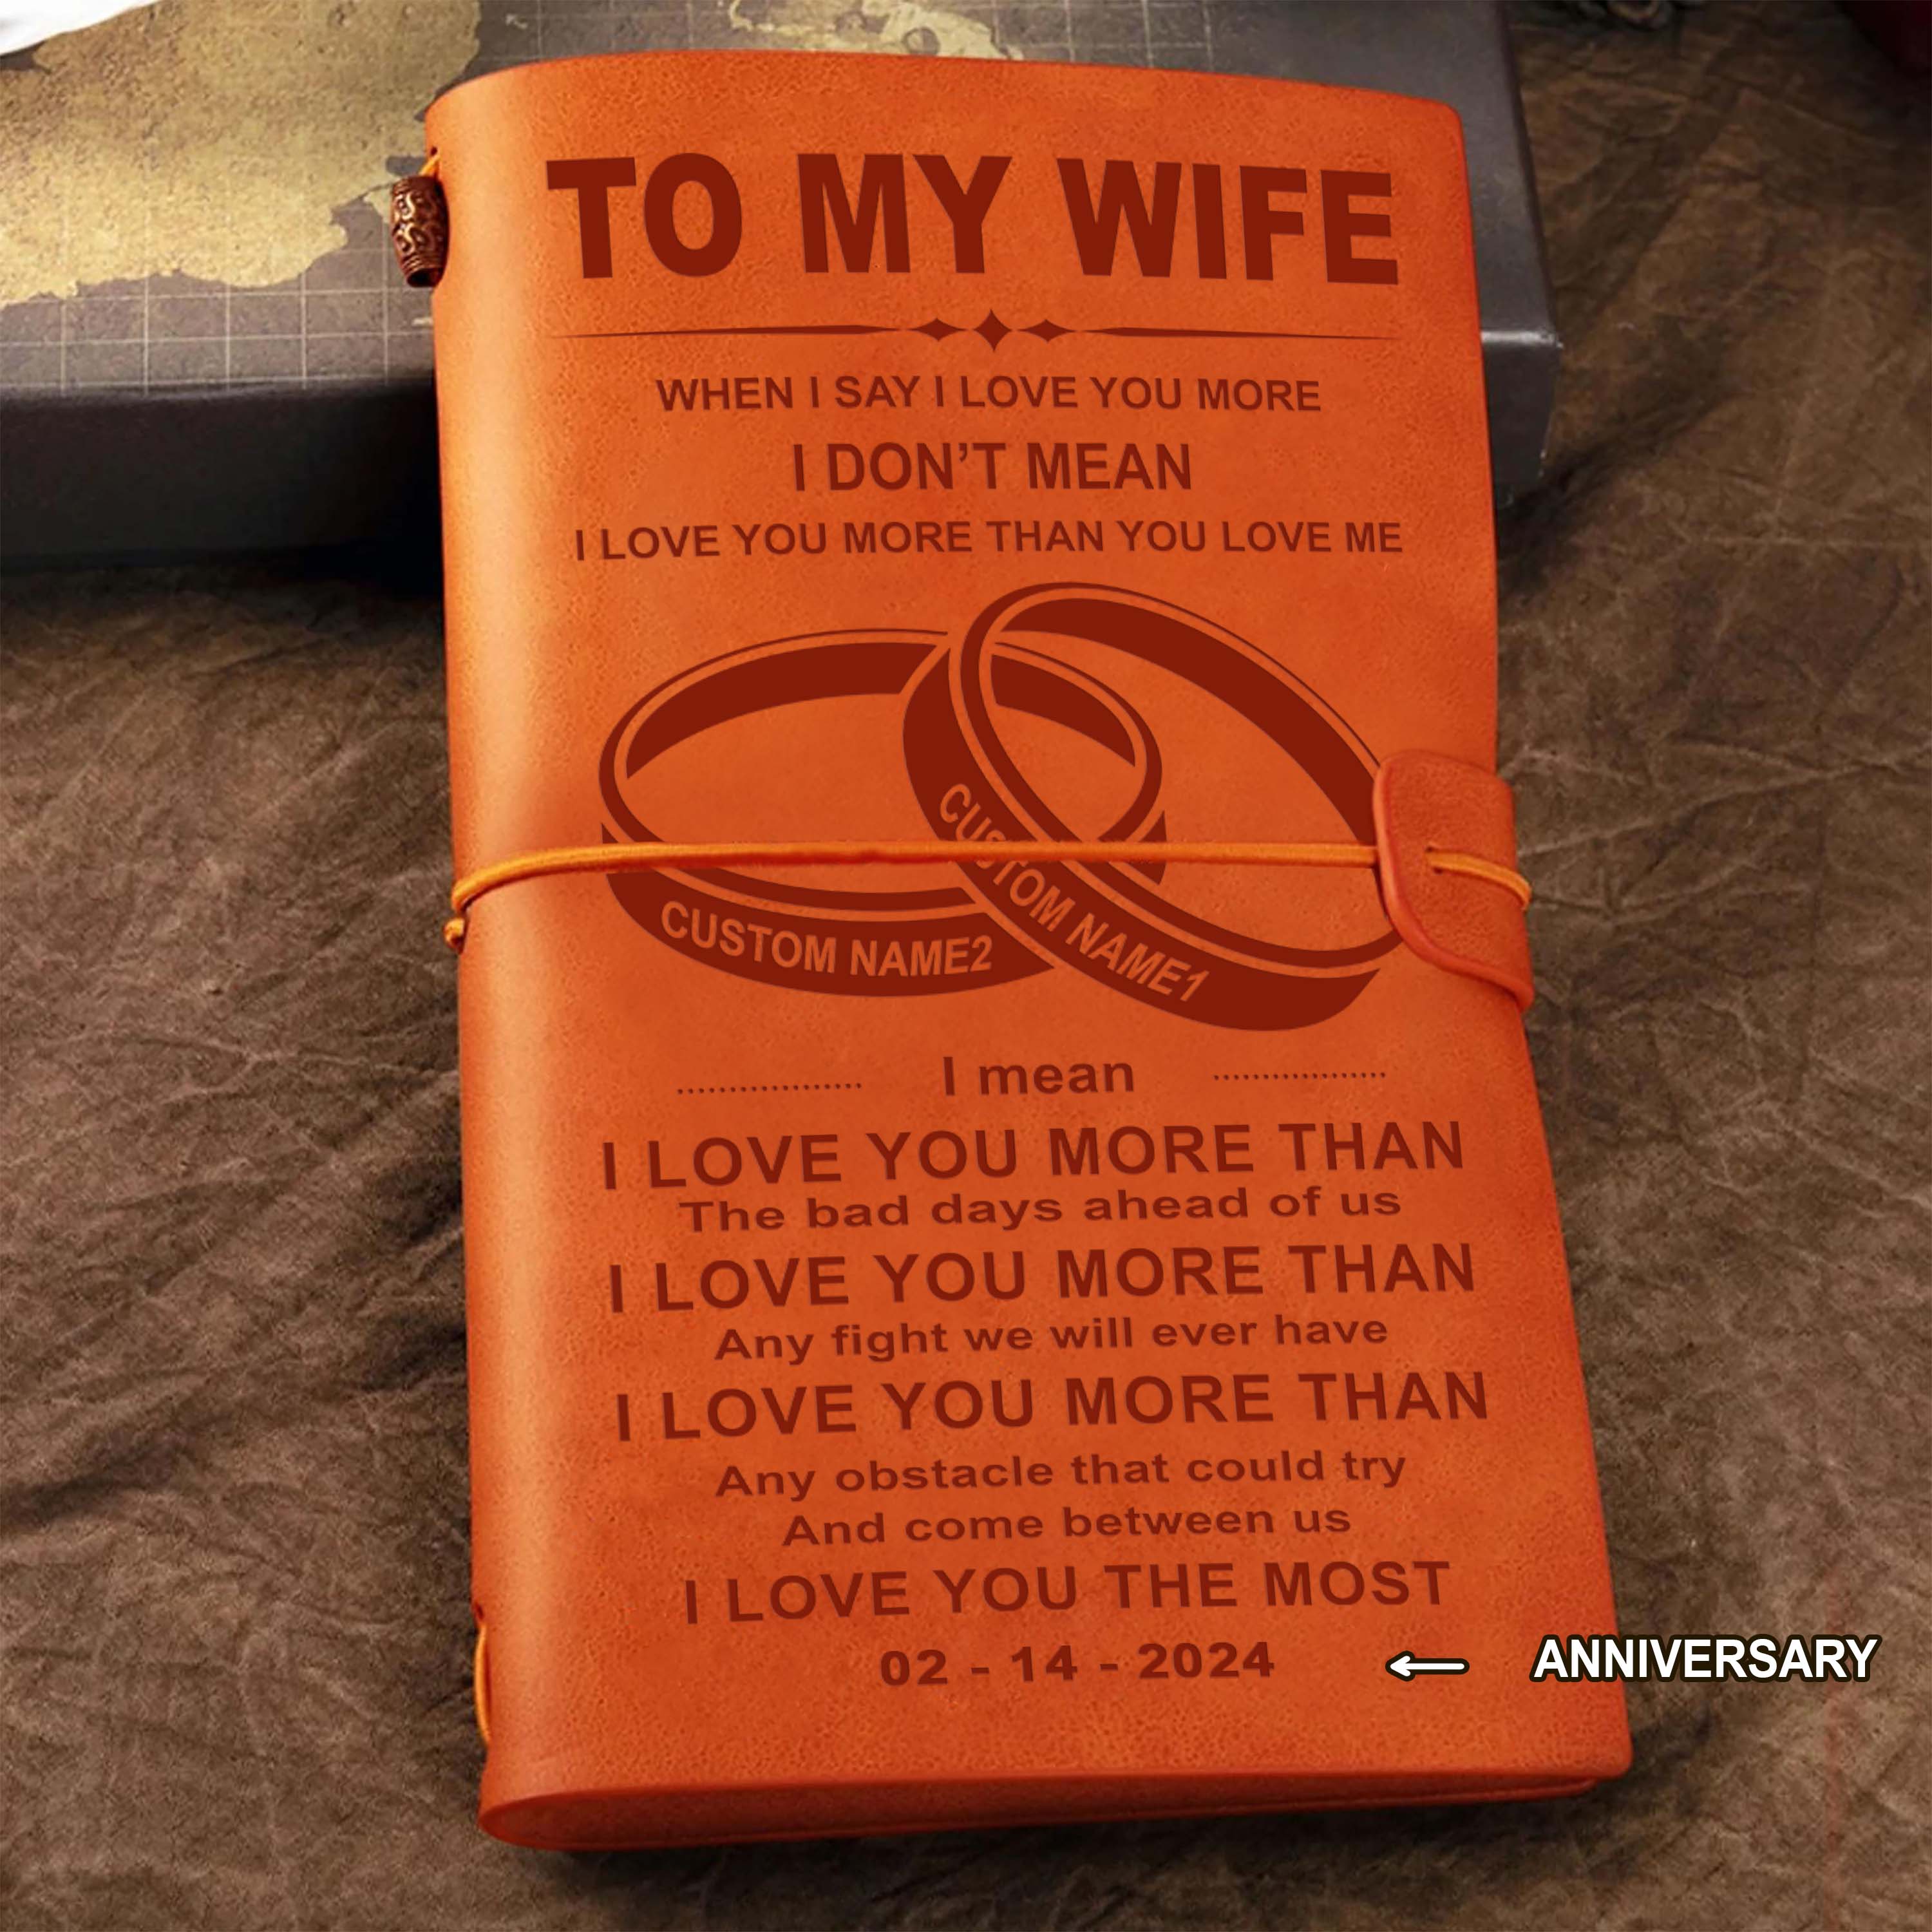 Valentines gifts-Vintage Journal Husband to wife- When I say i love you more